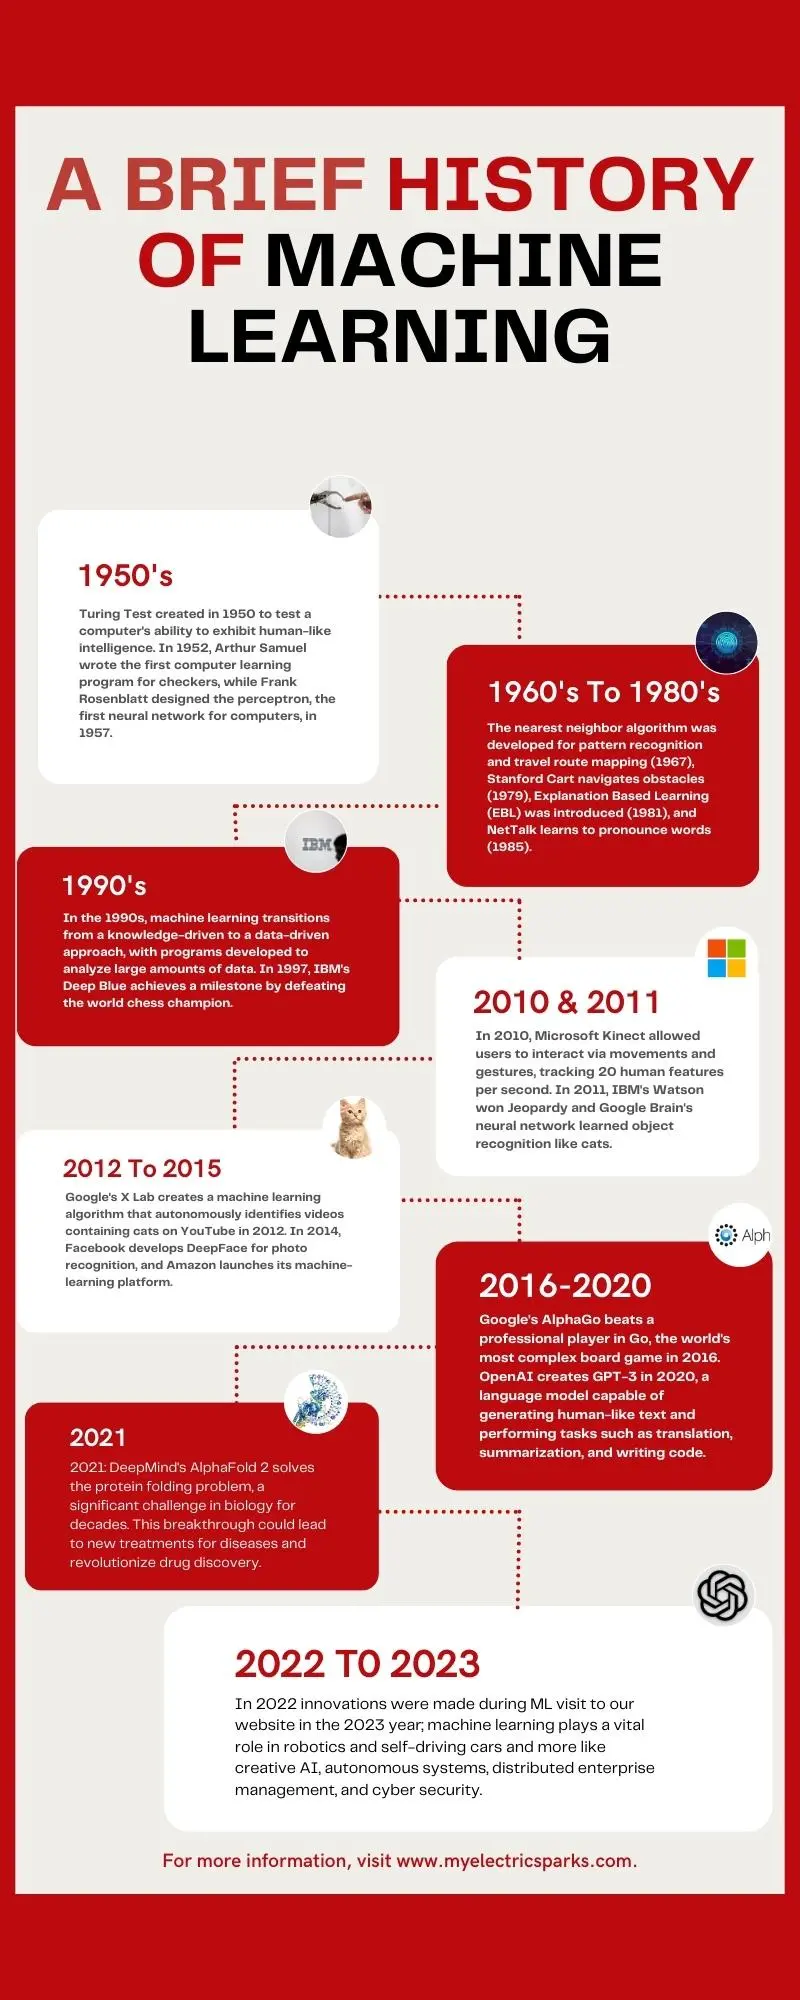 A timeline of key events in the history of machine learning from the 1950s to 2023.